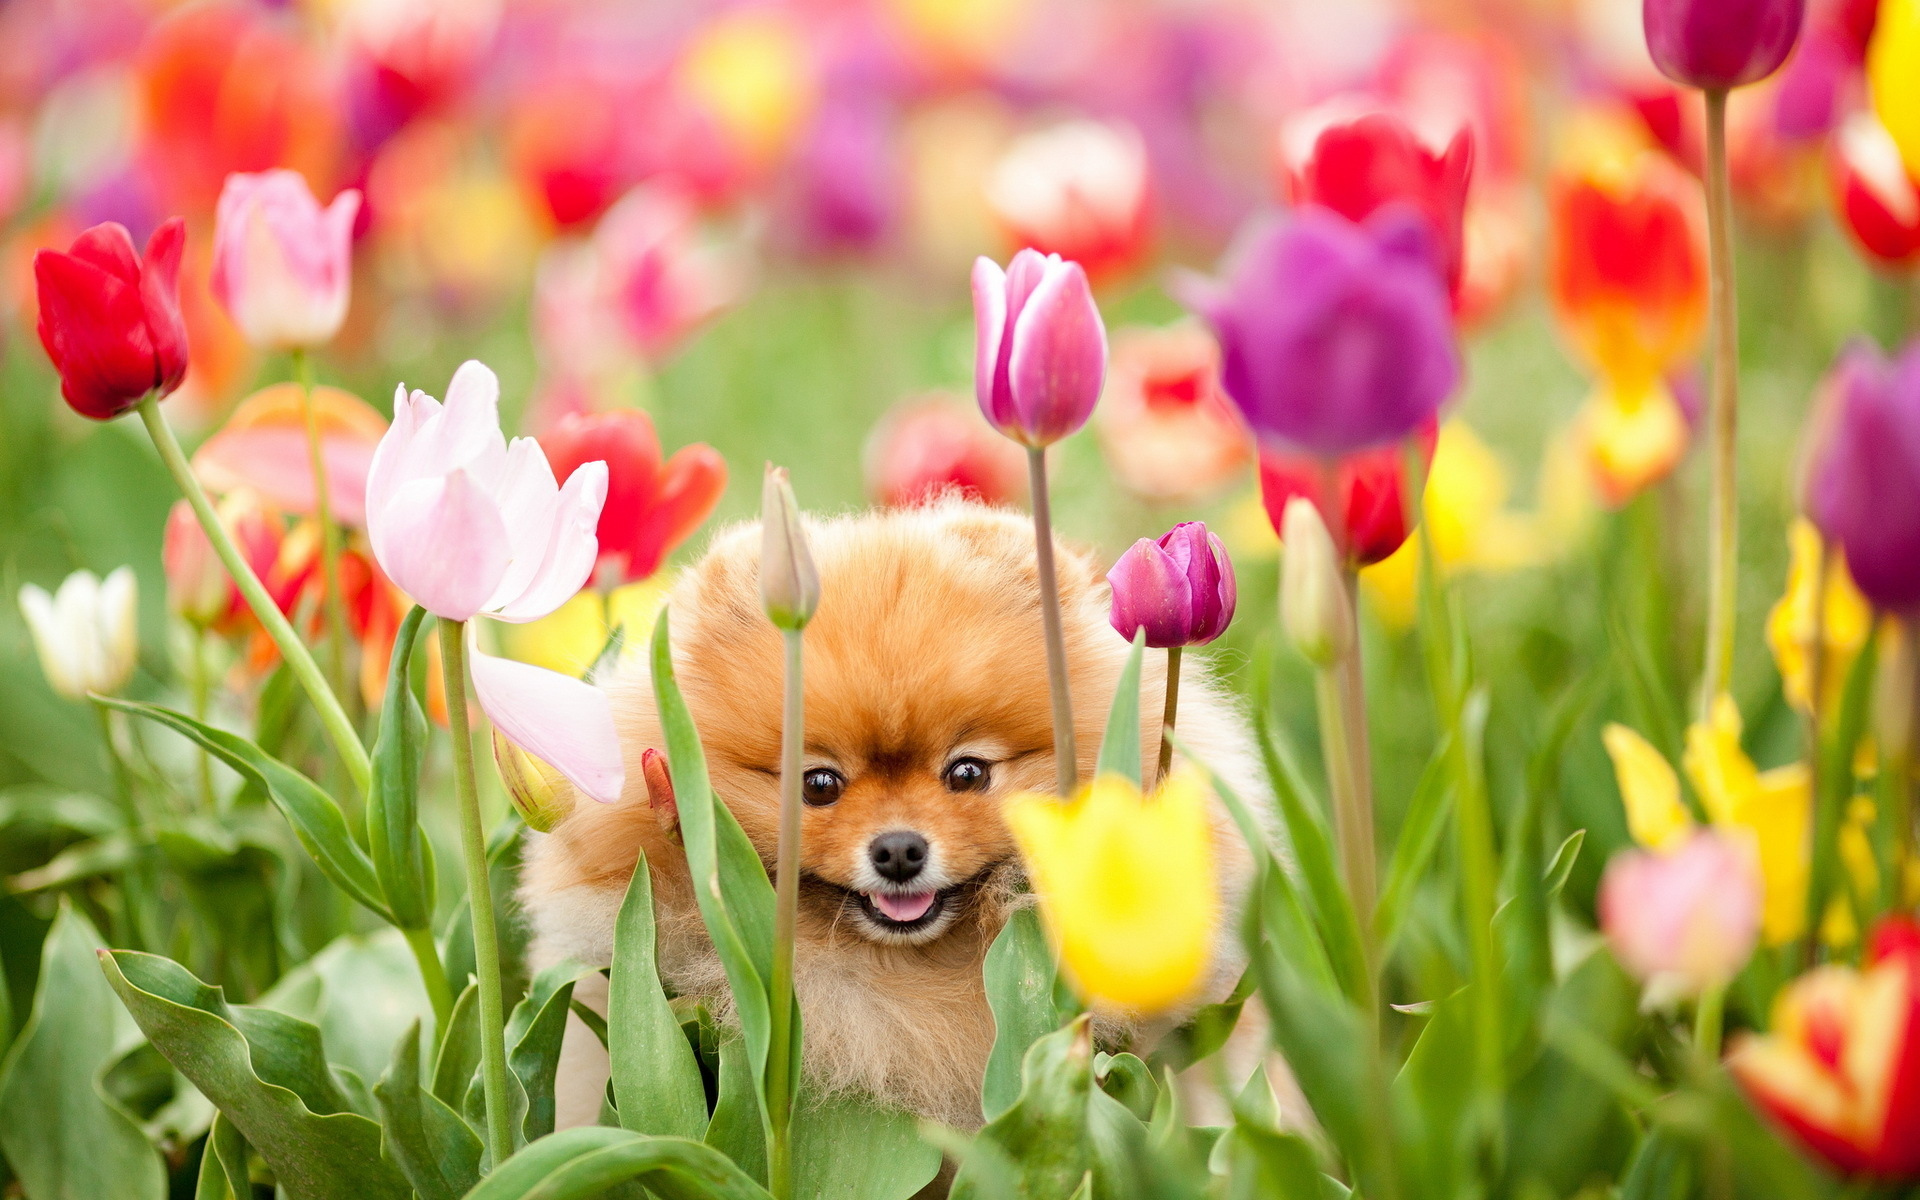 Dog And Tulips Wallpaper Image Pictures Photos